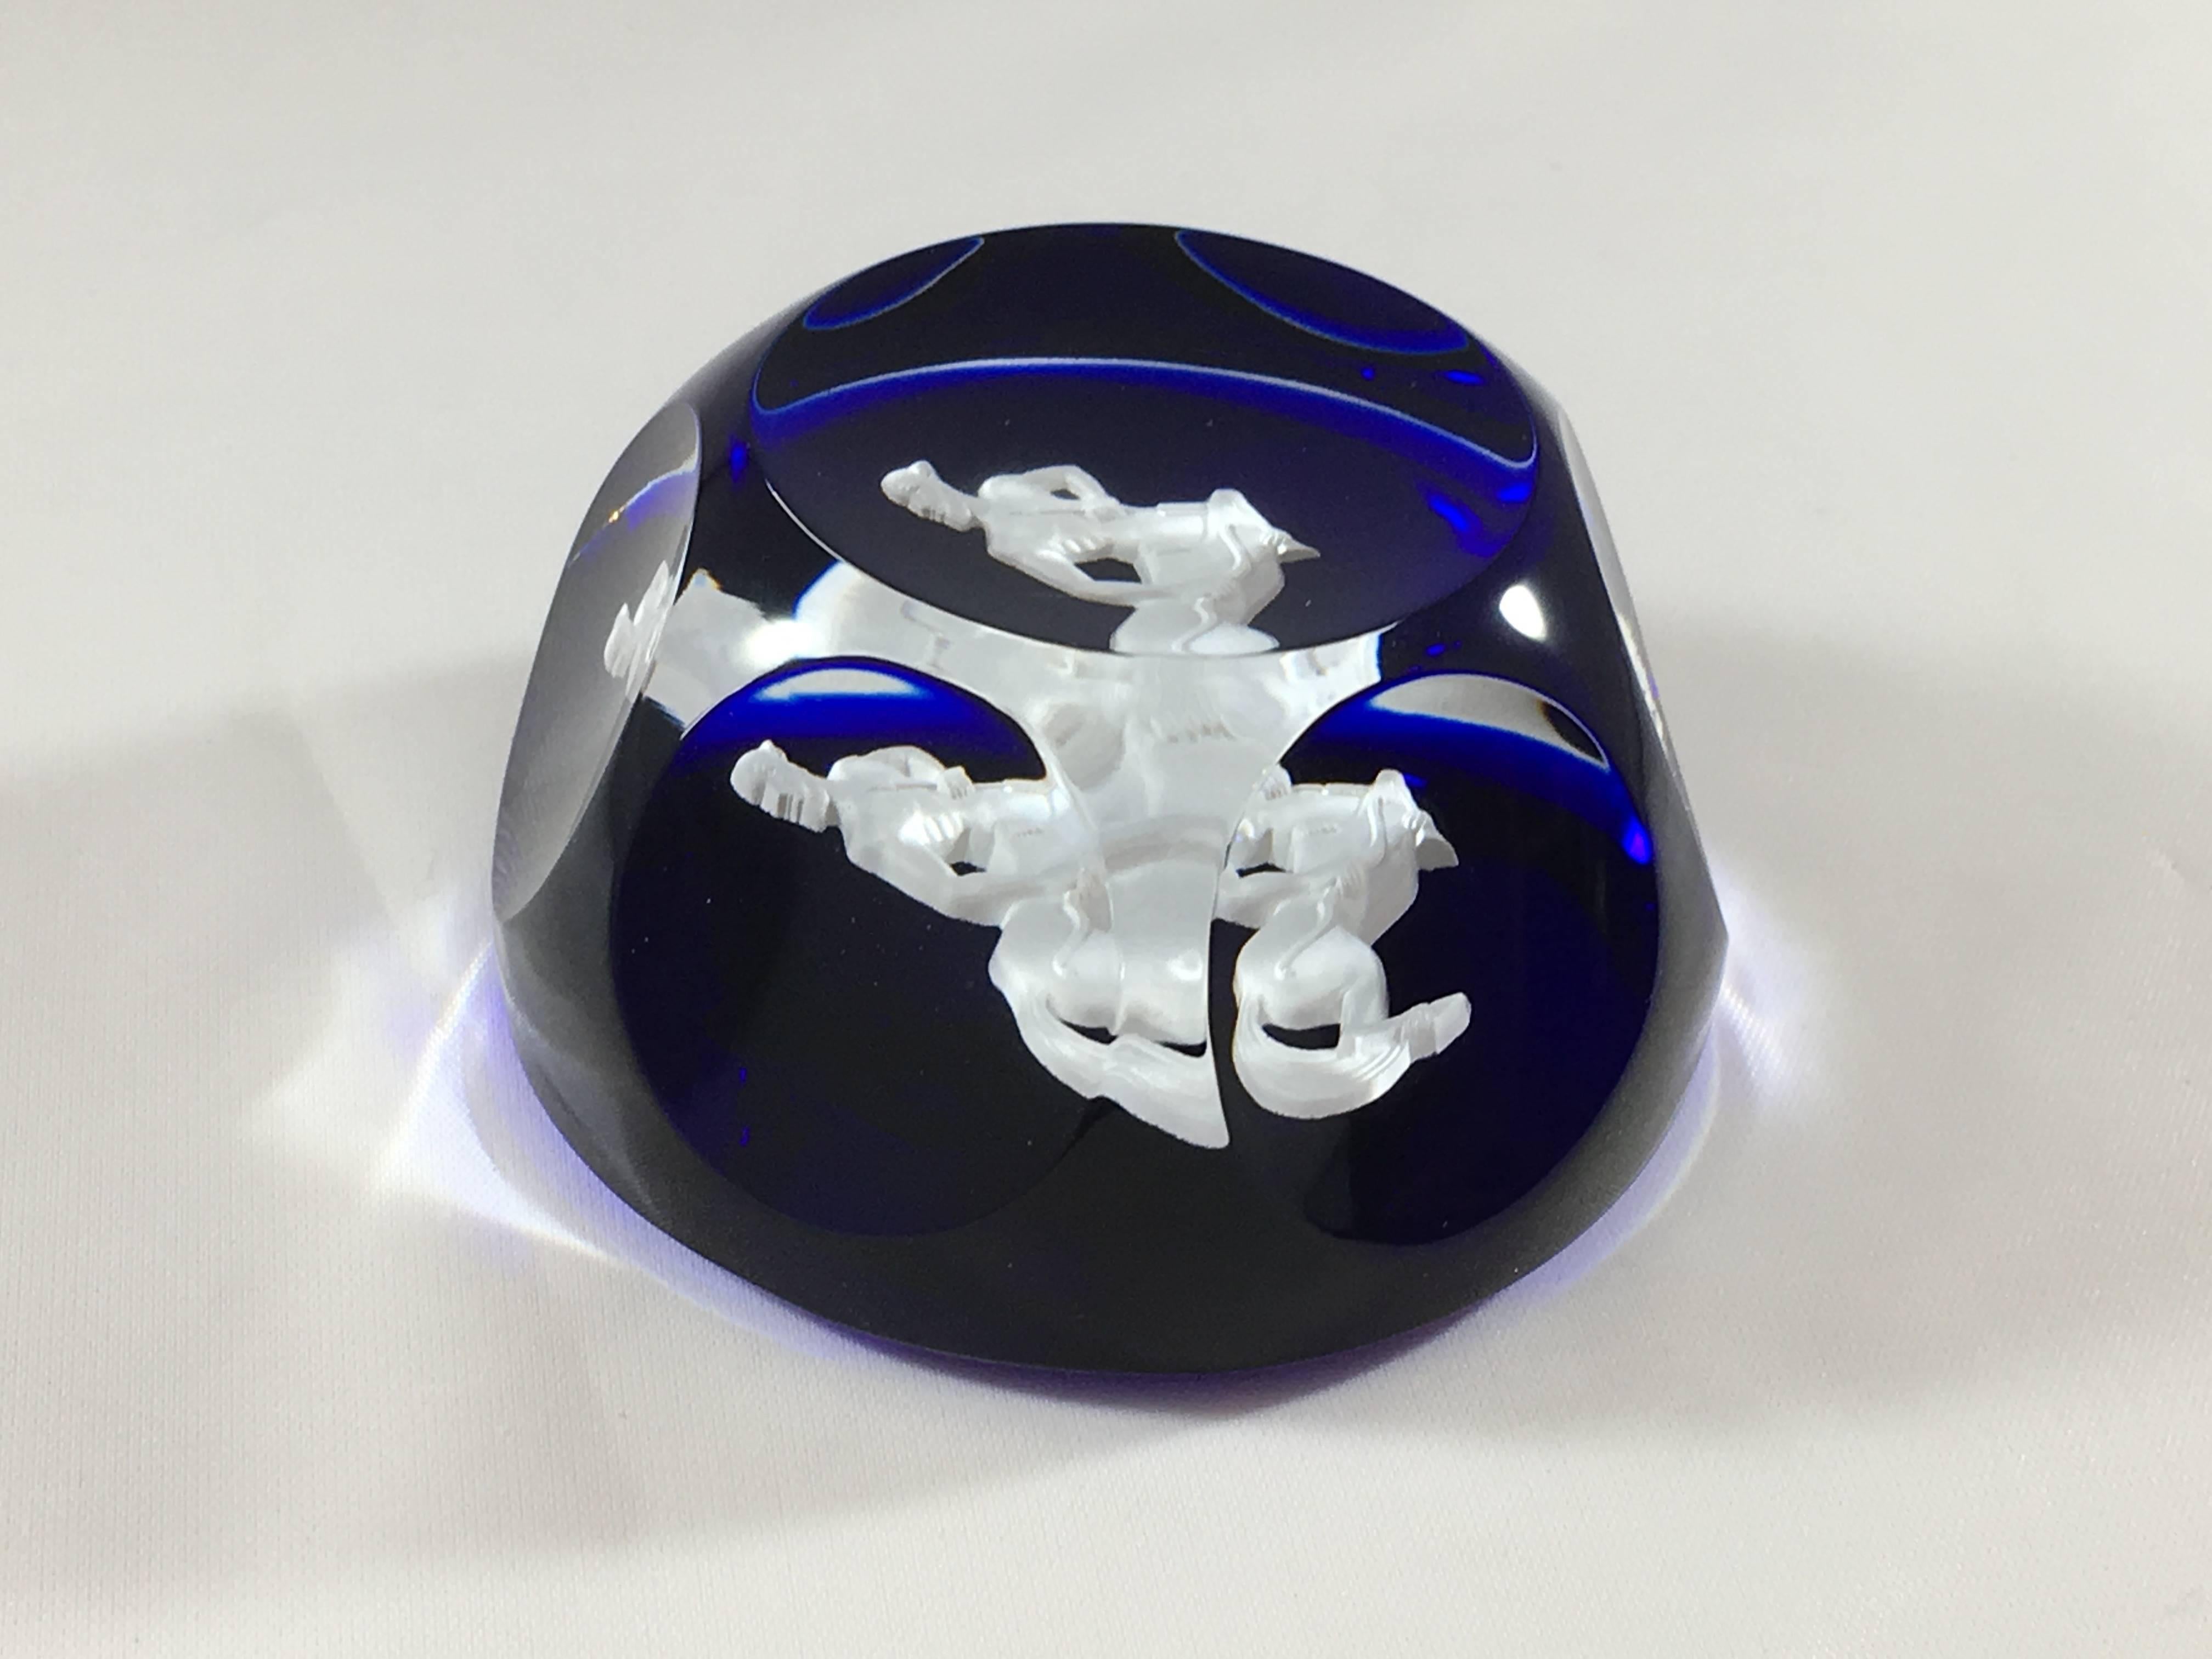 This is a 1970s colbalt blue and white sulphide Sagittarius paperweight made by Baccarat. It has six faceted sides. It is 1 3/4